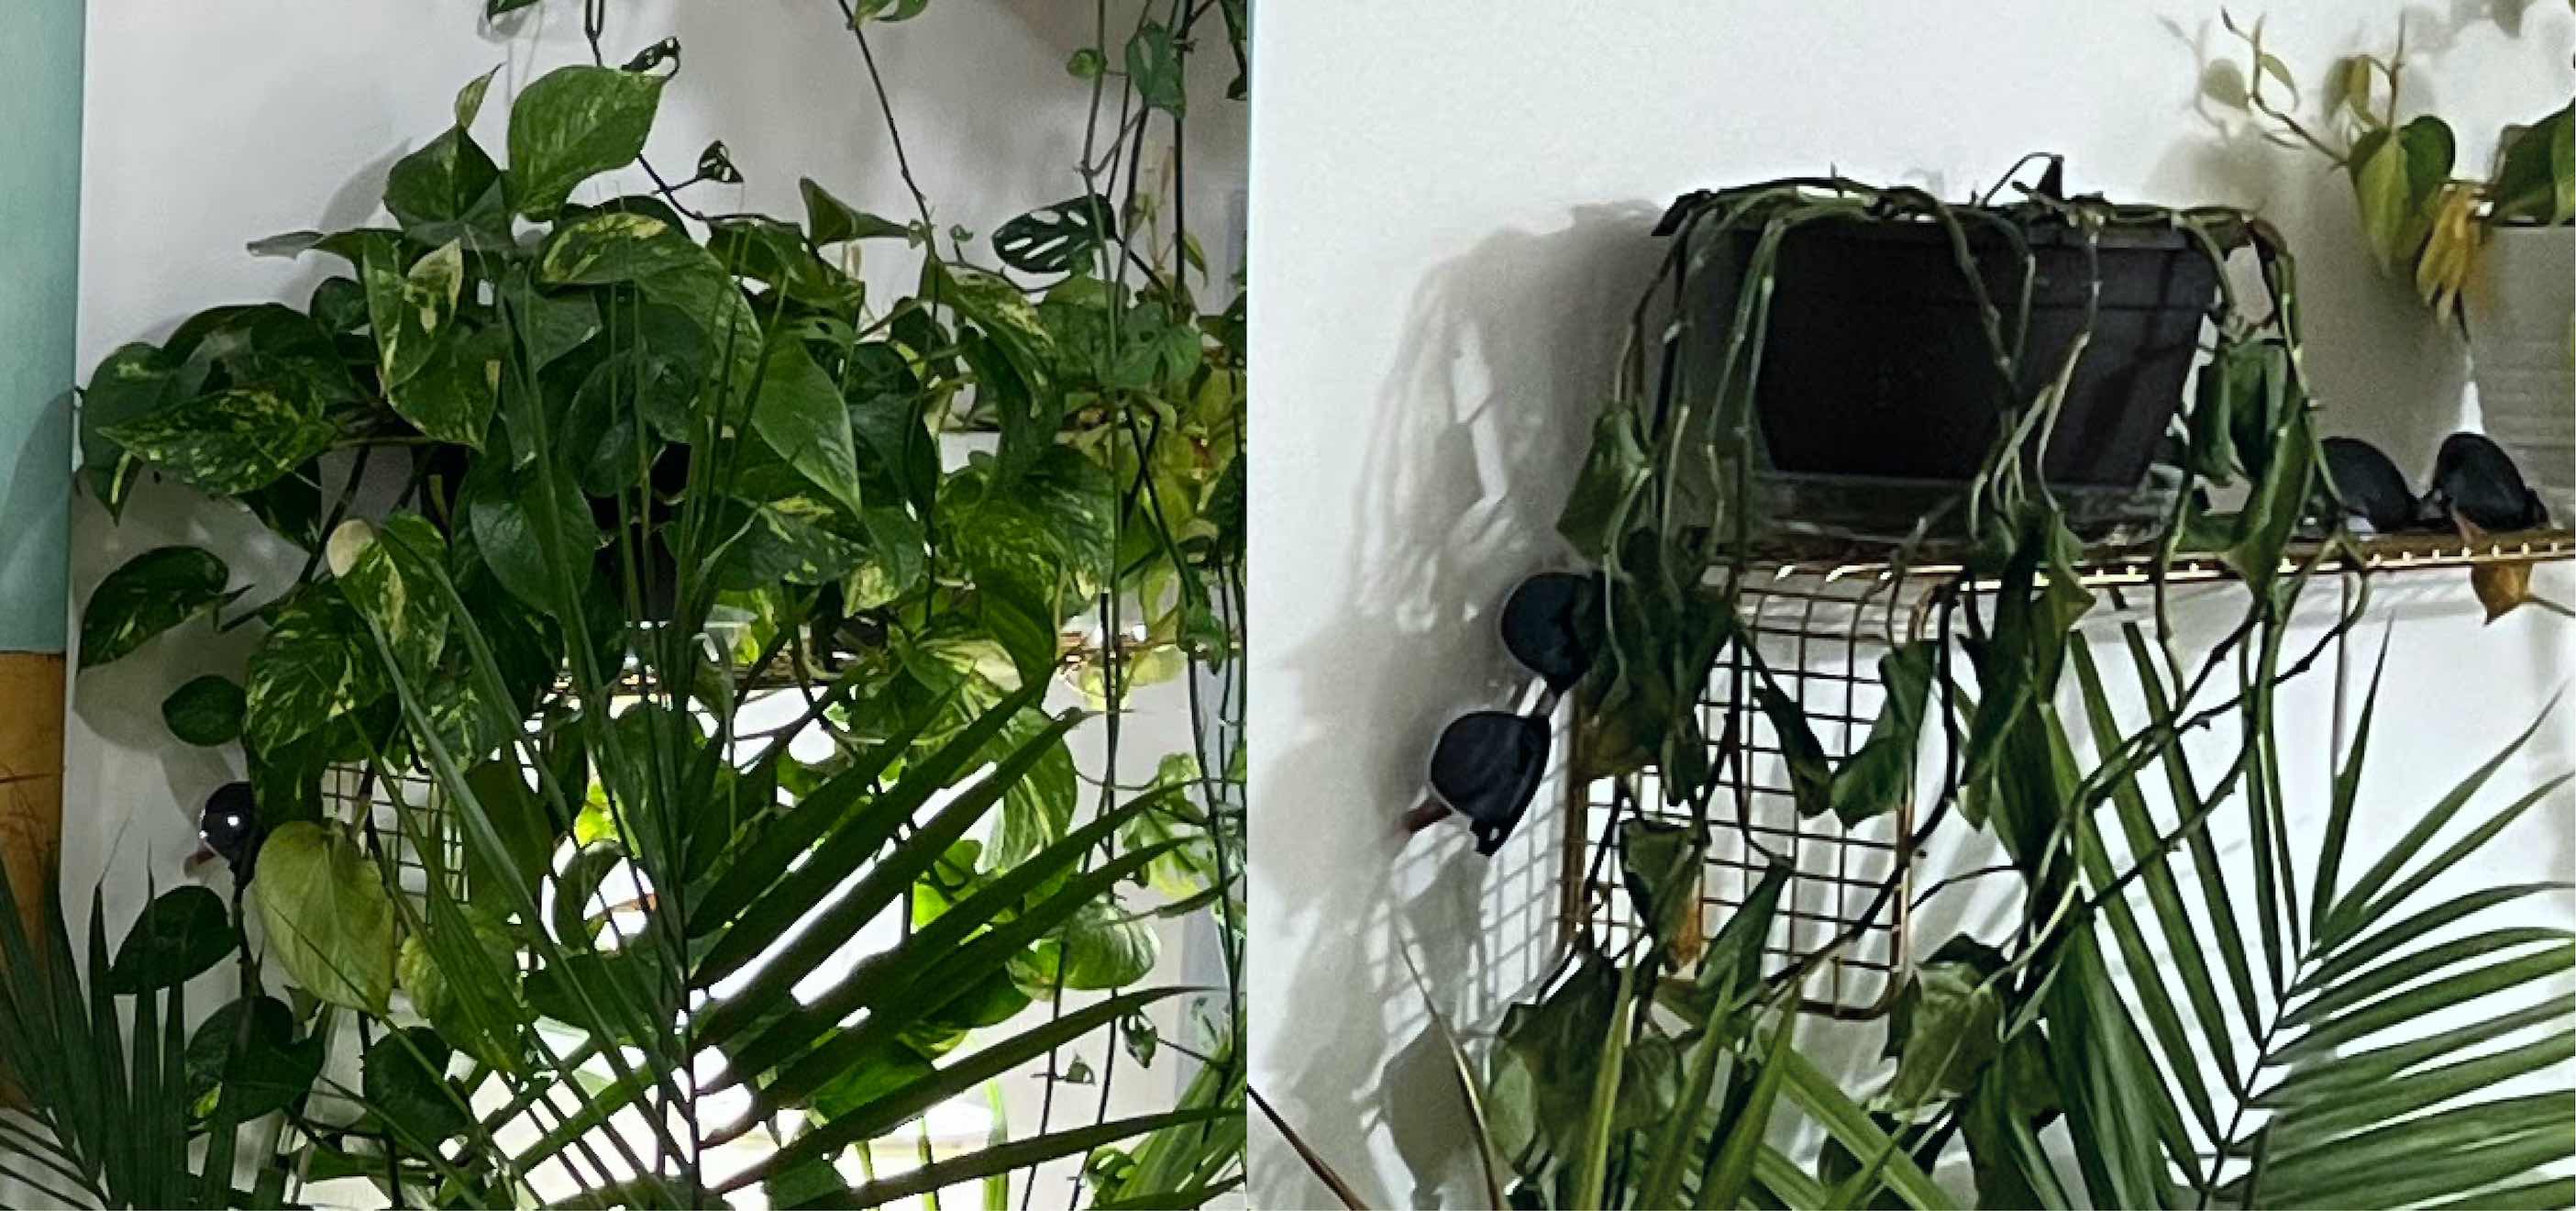 On the left is a pothos that is voluminous and green. On the right is the same pothos, but it’s lost most of it’s leaves.